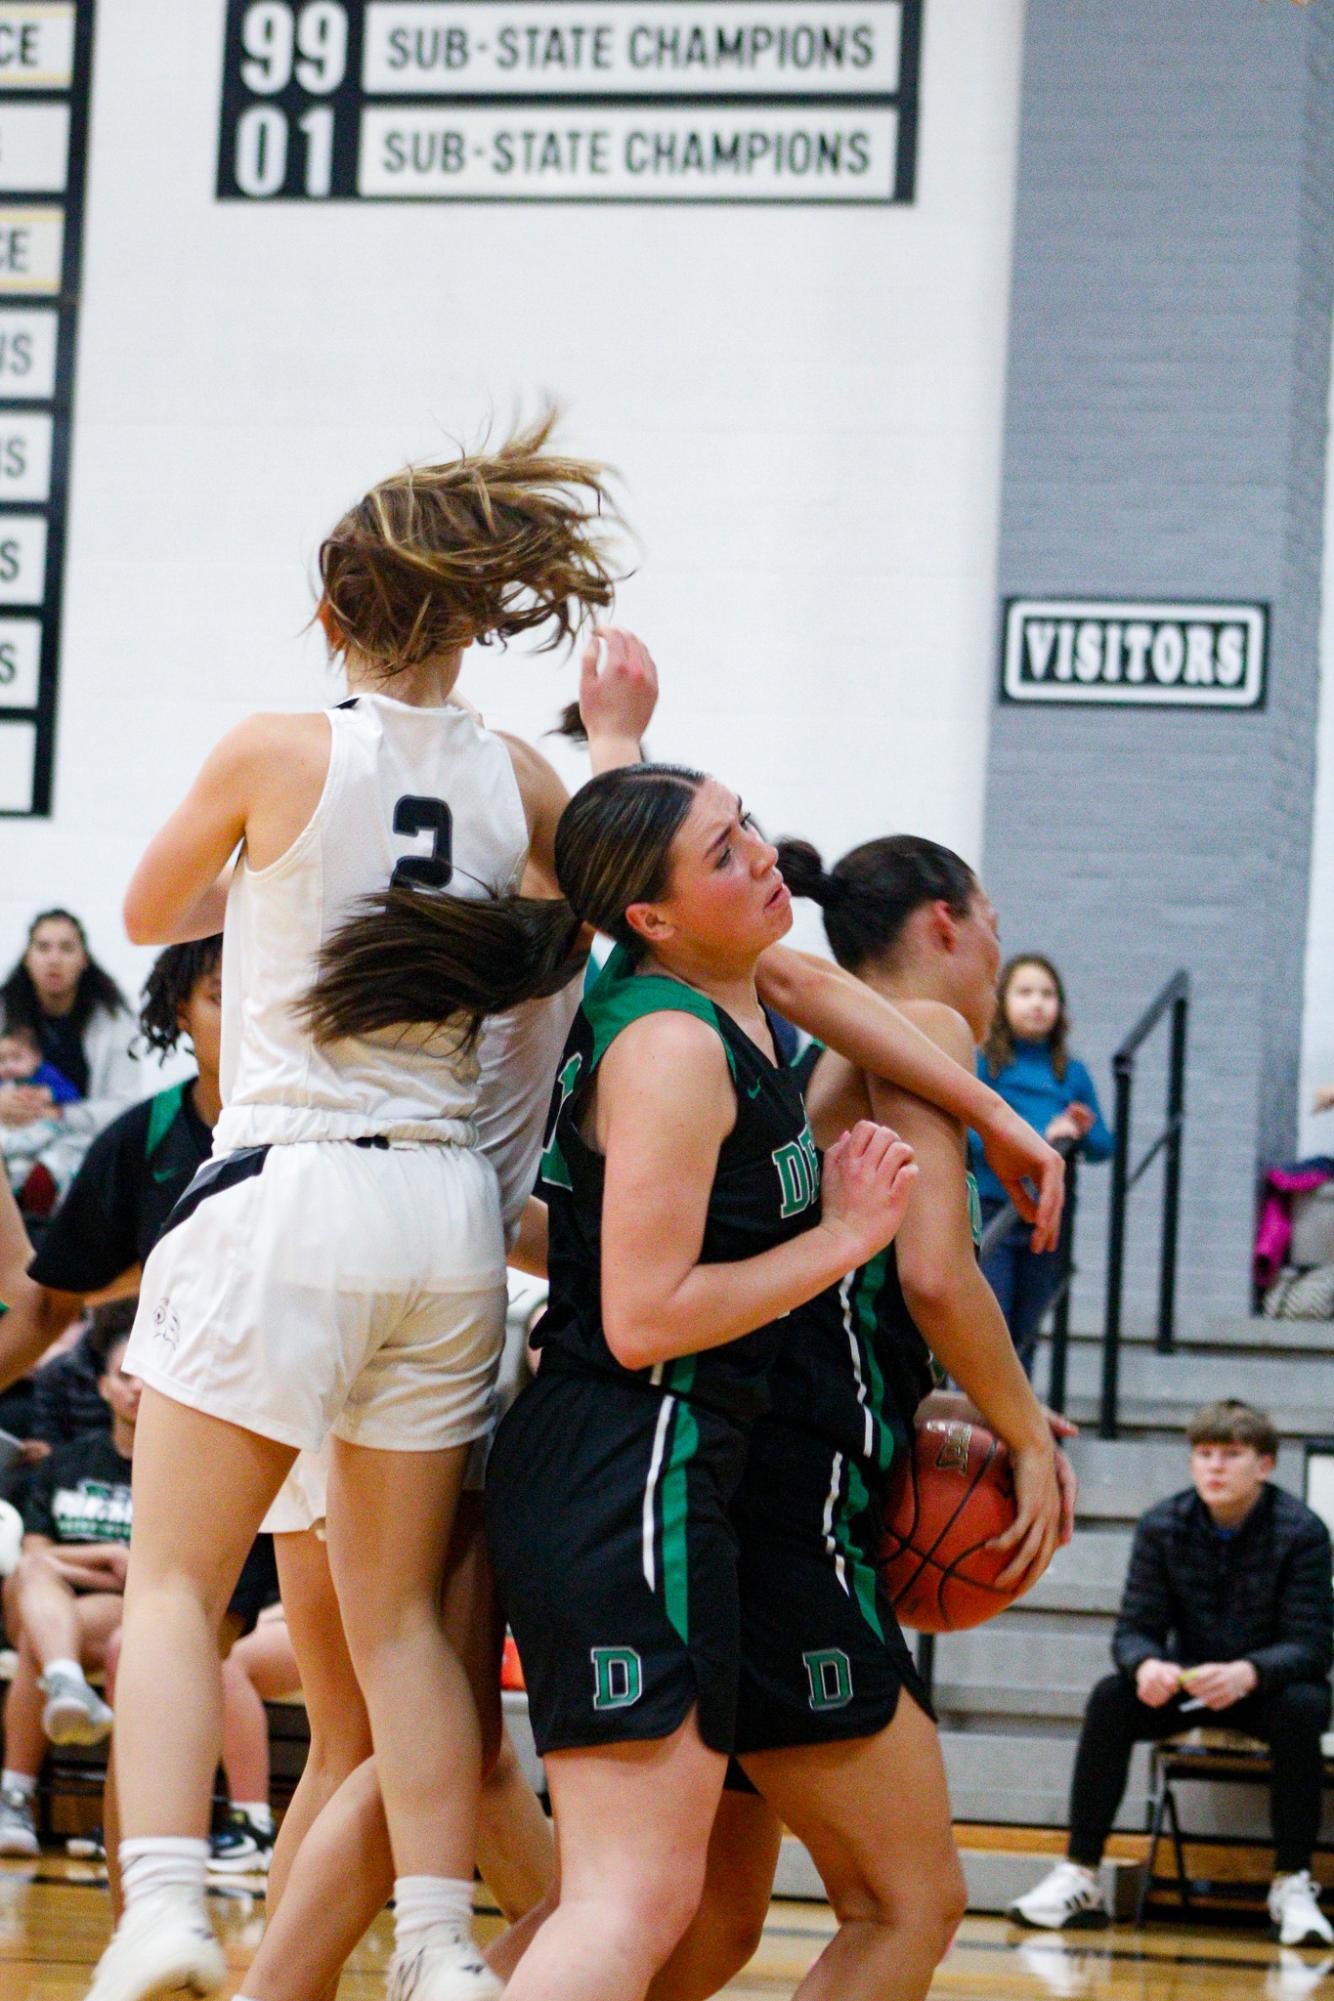 Girls+basketball+vs.+Campus+%28Photos+by+Laurisa+Rooney%29